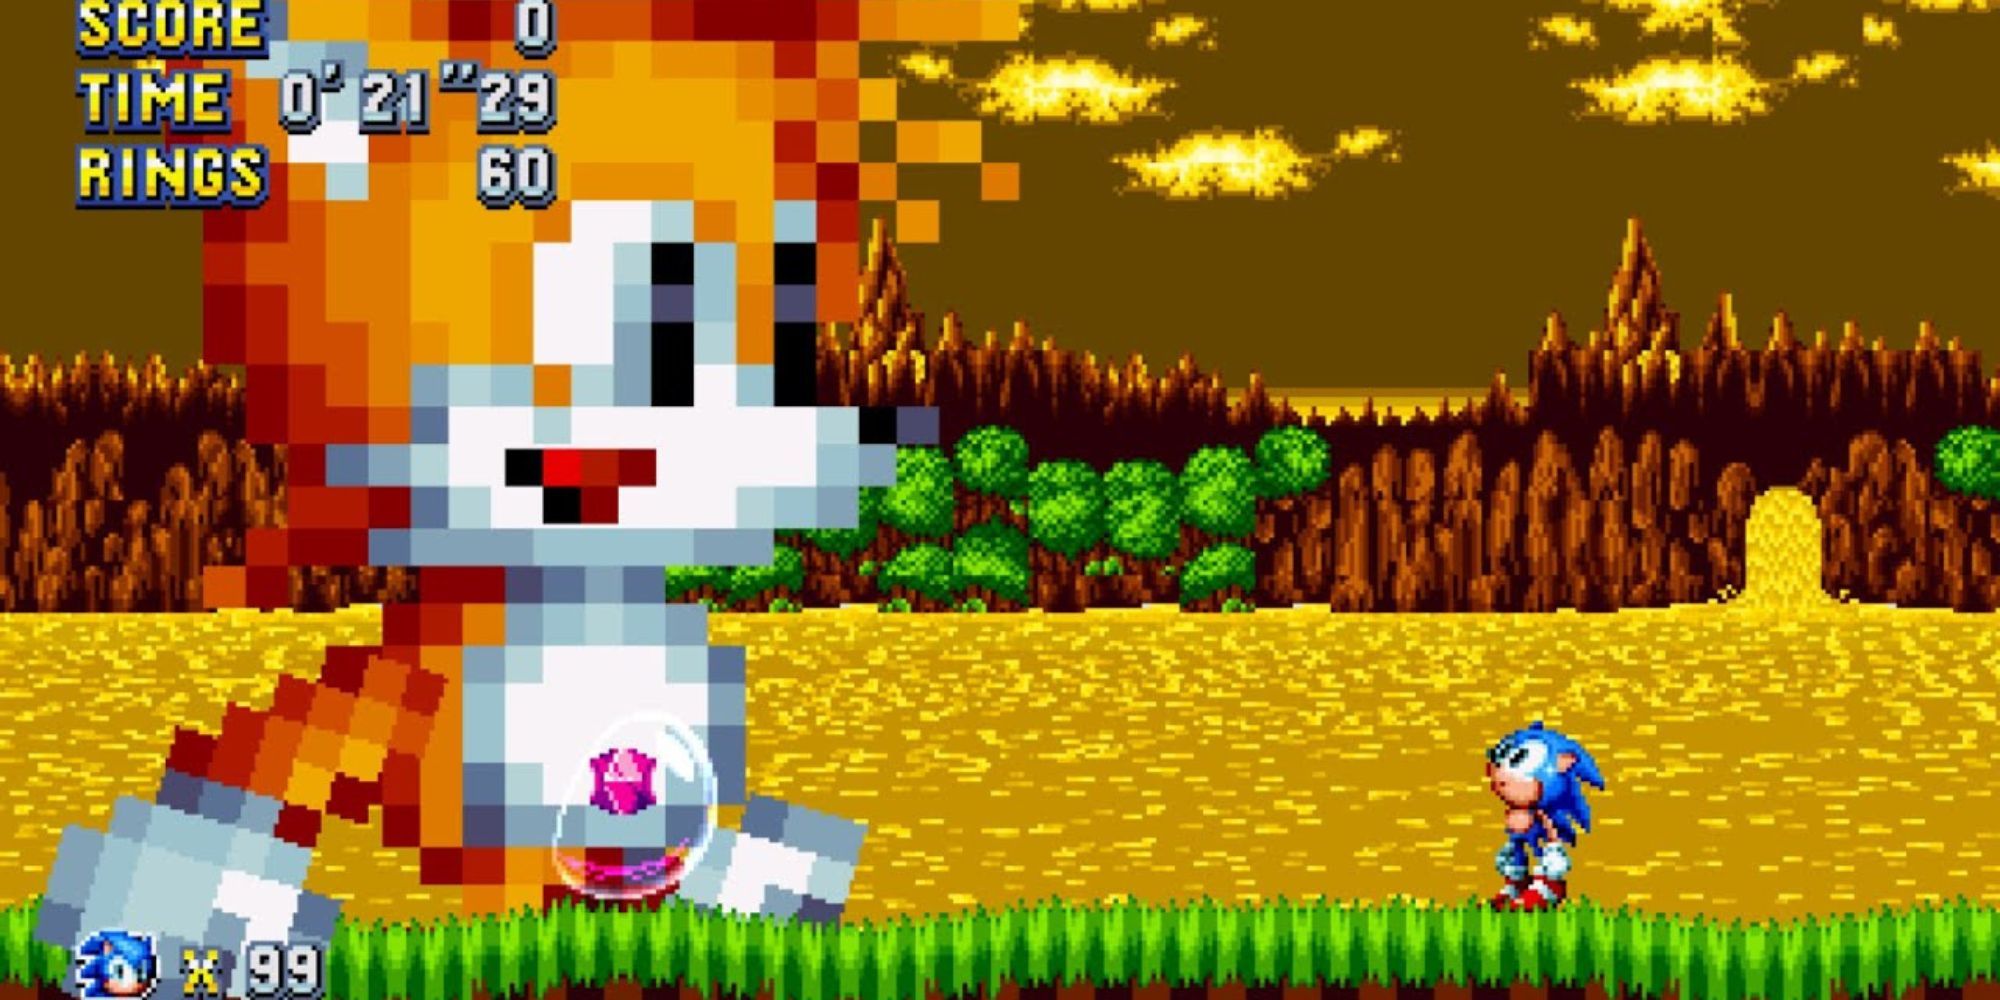 Tails Solo Game - Feature 